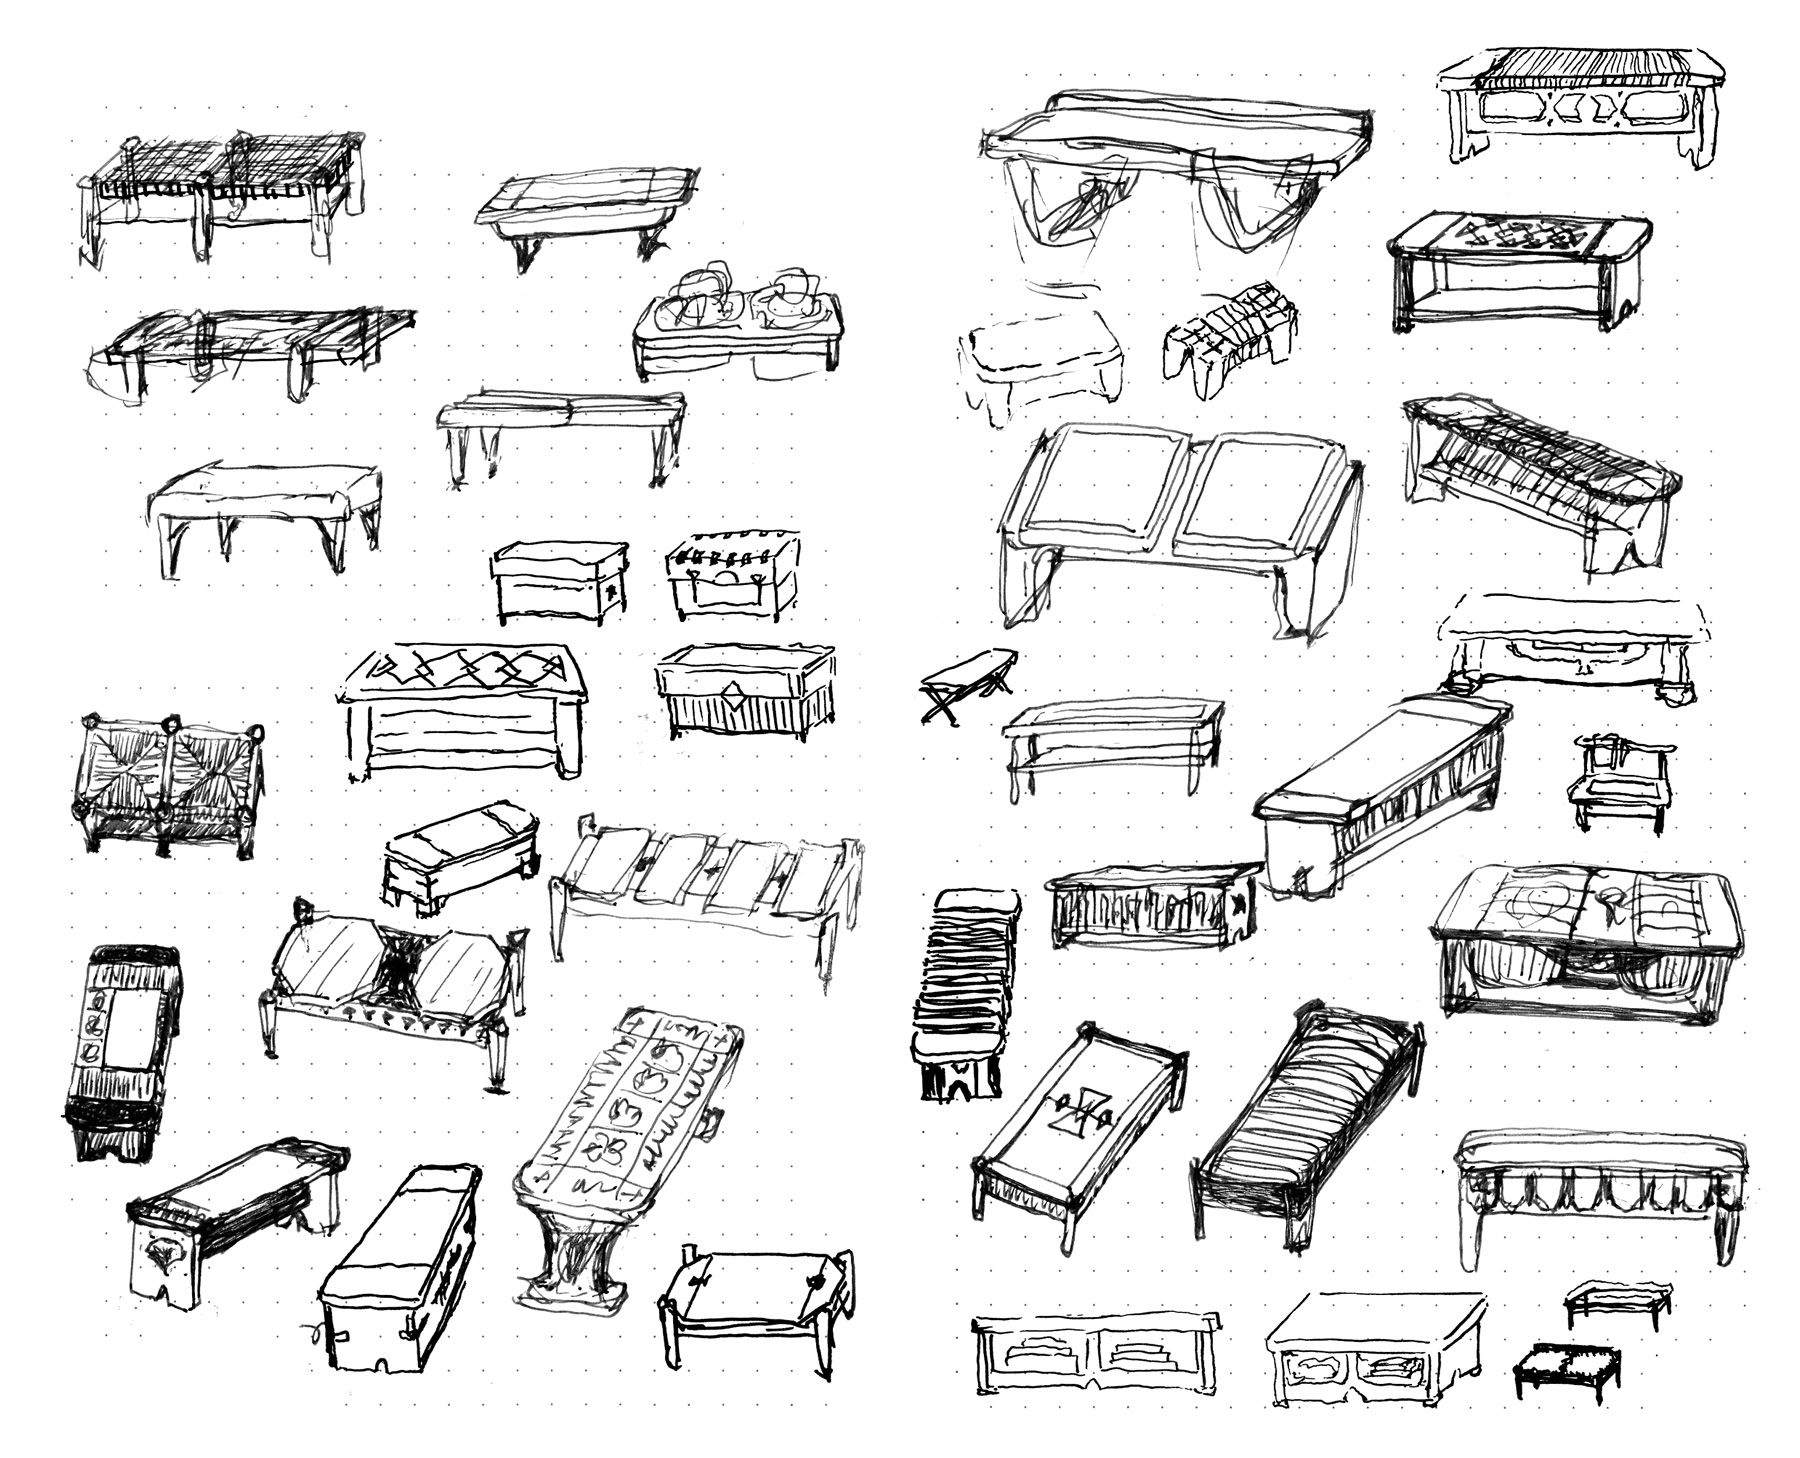 Sketches of bench designs.